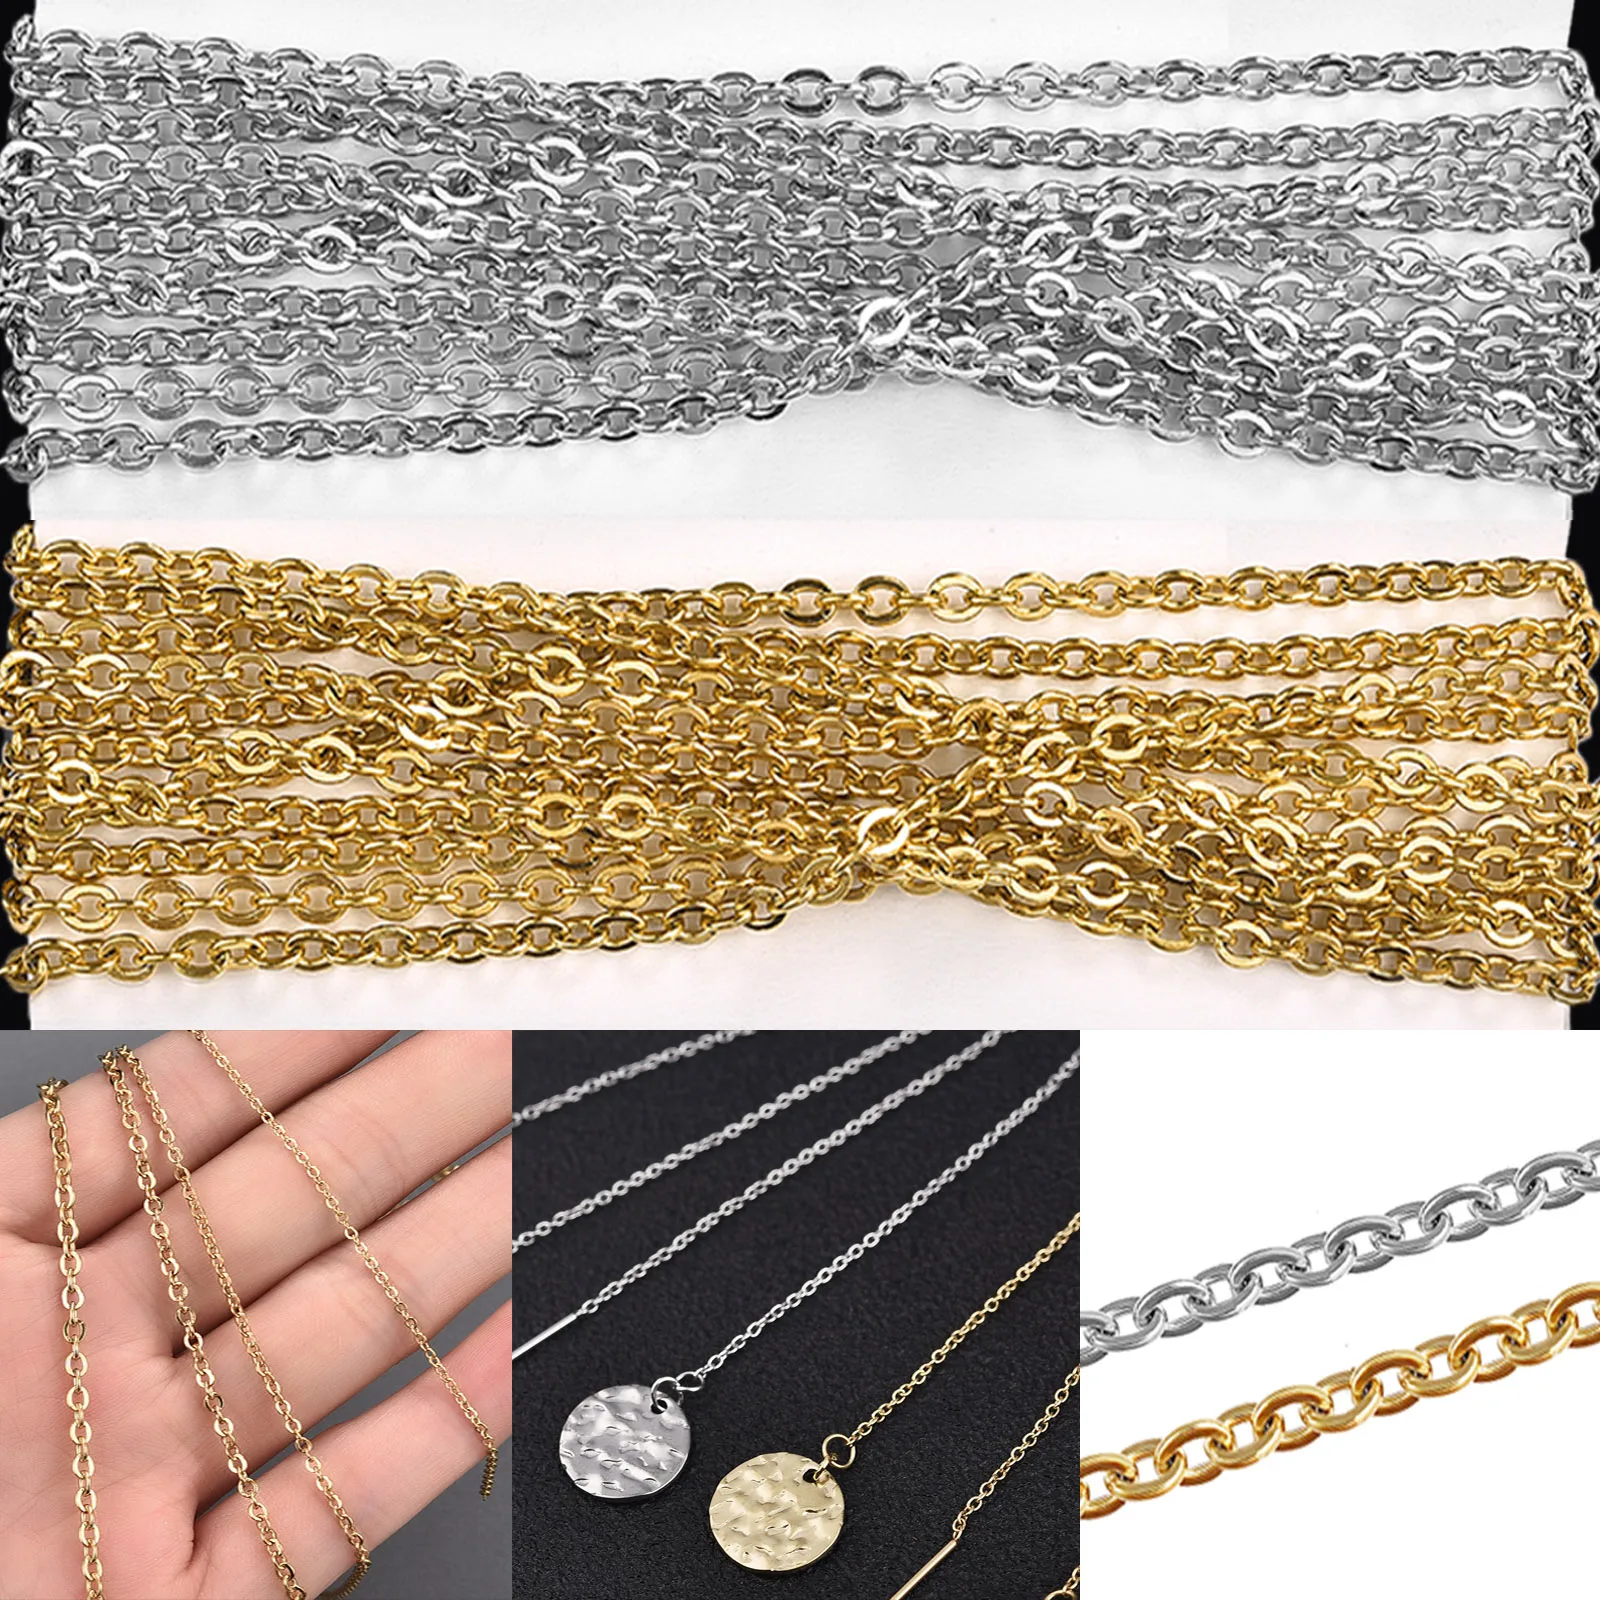 2 Meter Stainless Steel Chain DIY Chains Jewelry Making 1/1.5/2/2.5mm Gold Chain For Necklace Earrings Findings Accessories